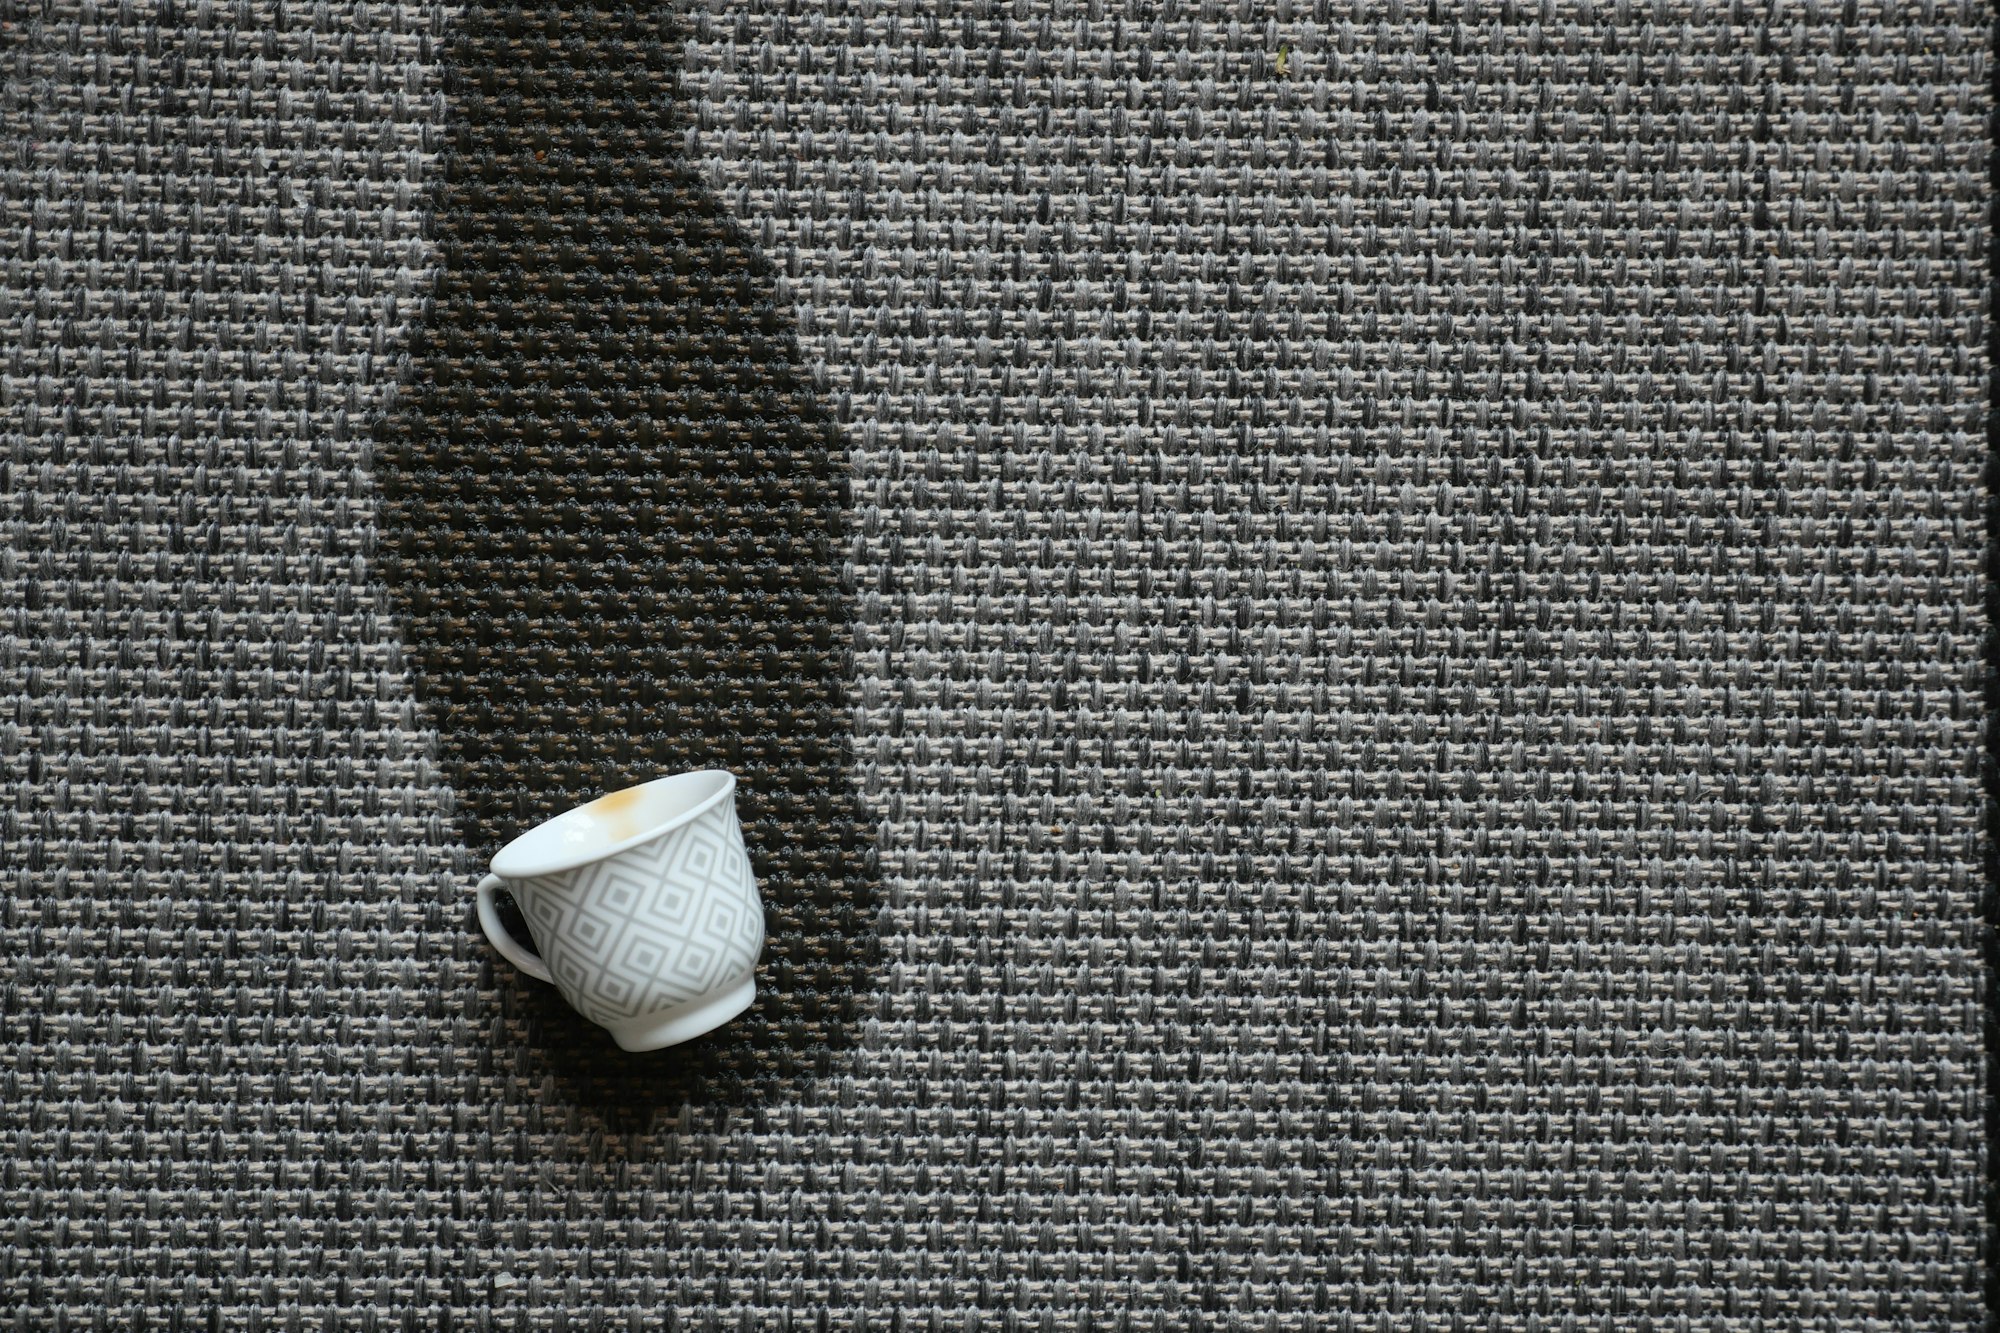 cup of coffee spilled on carpet